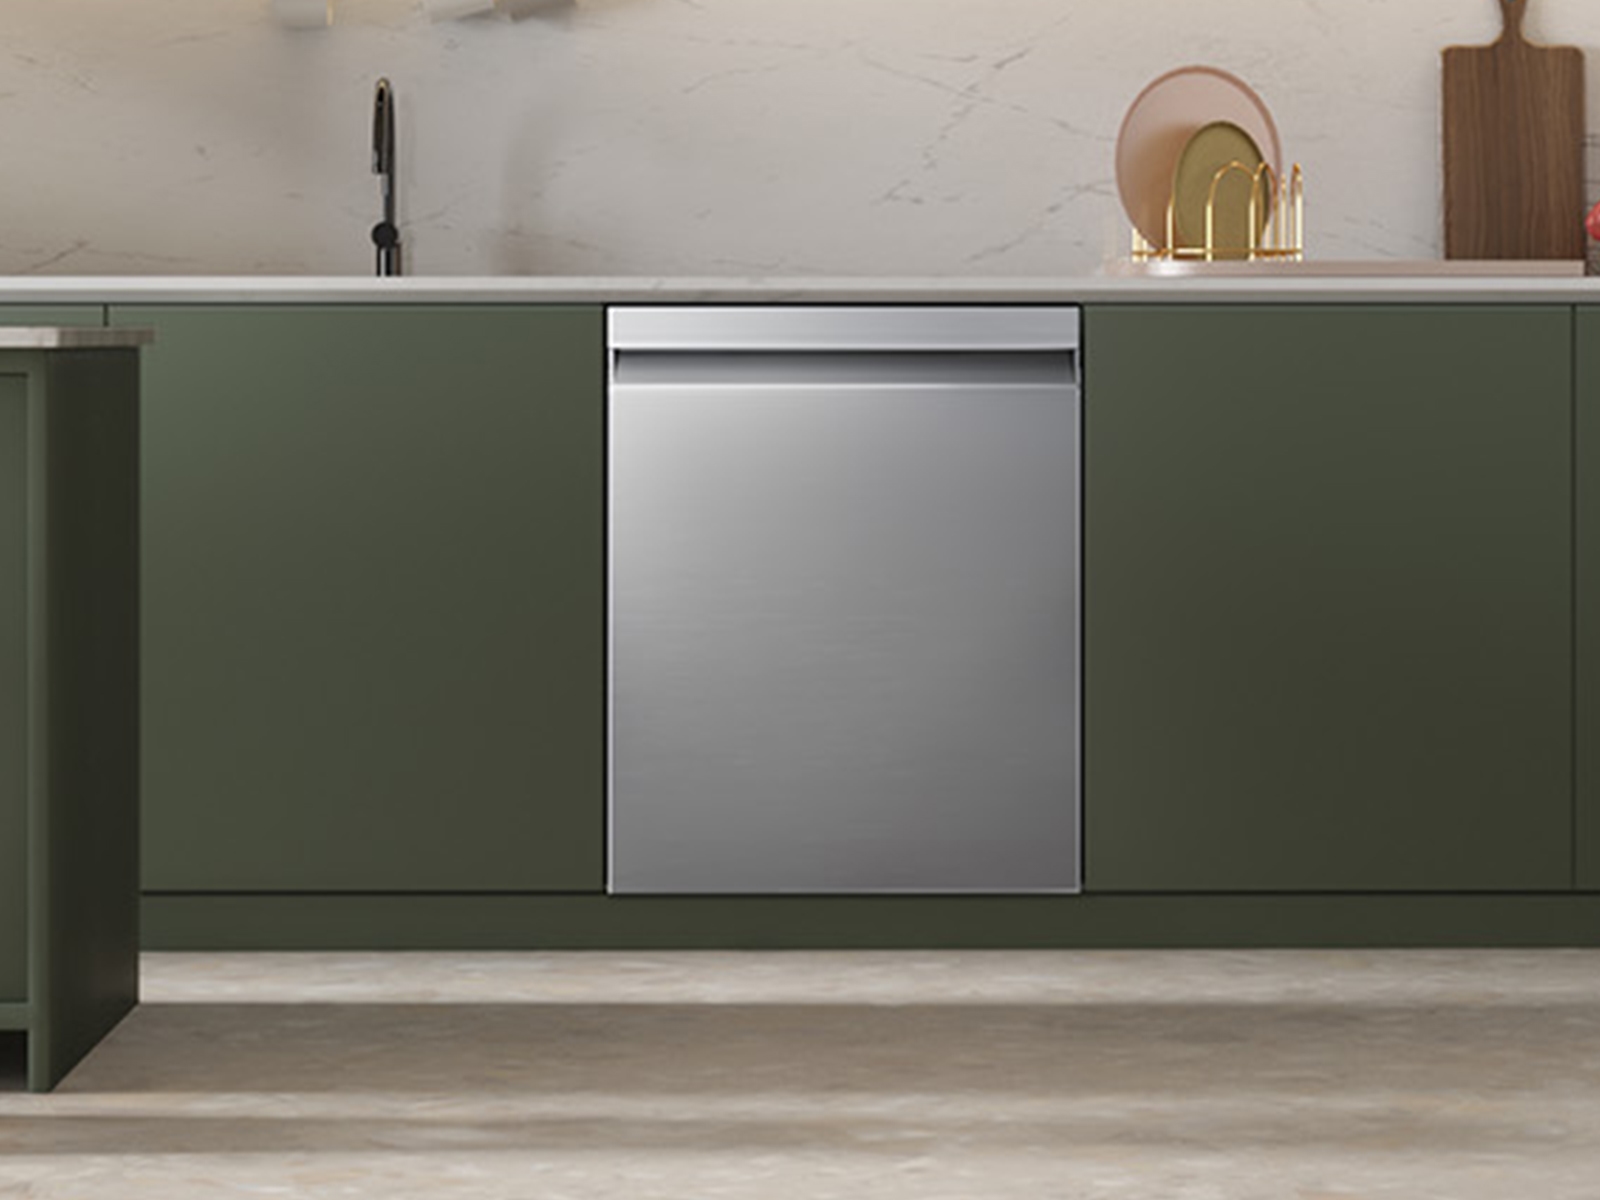 Smart 46 dBA Dishwasher with StormWash™ in Stainless Steel